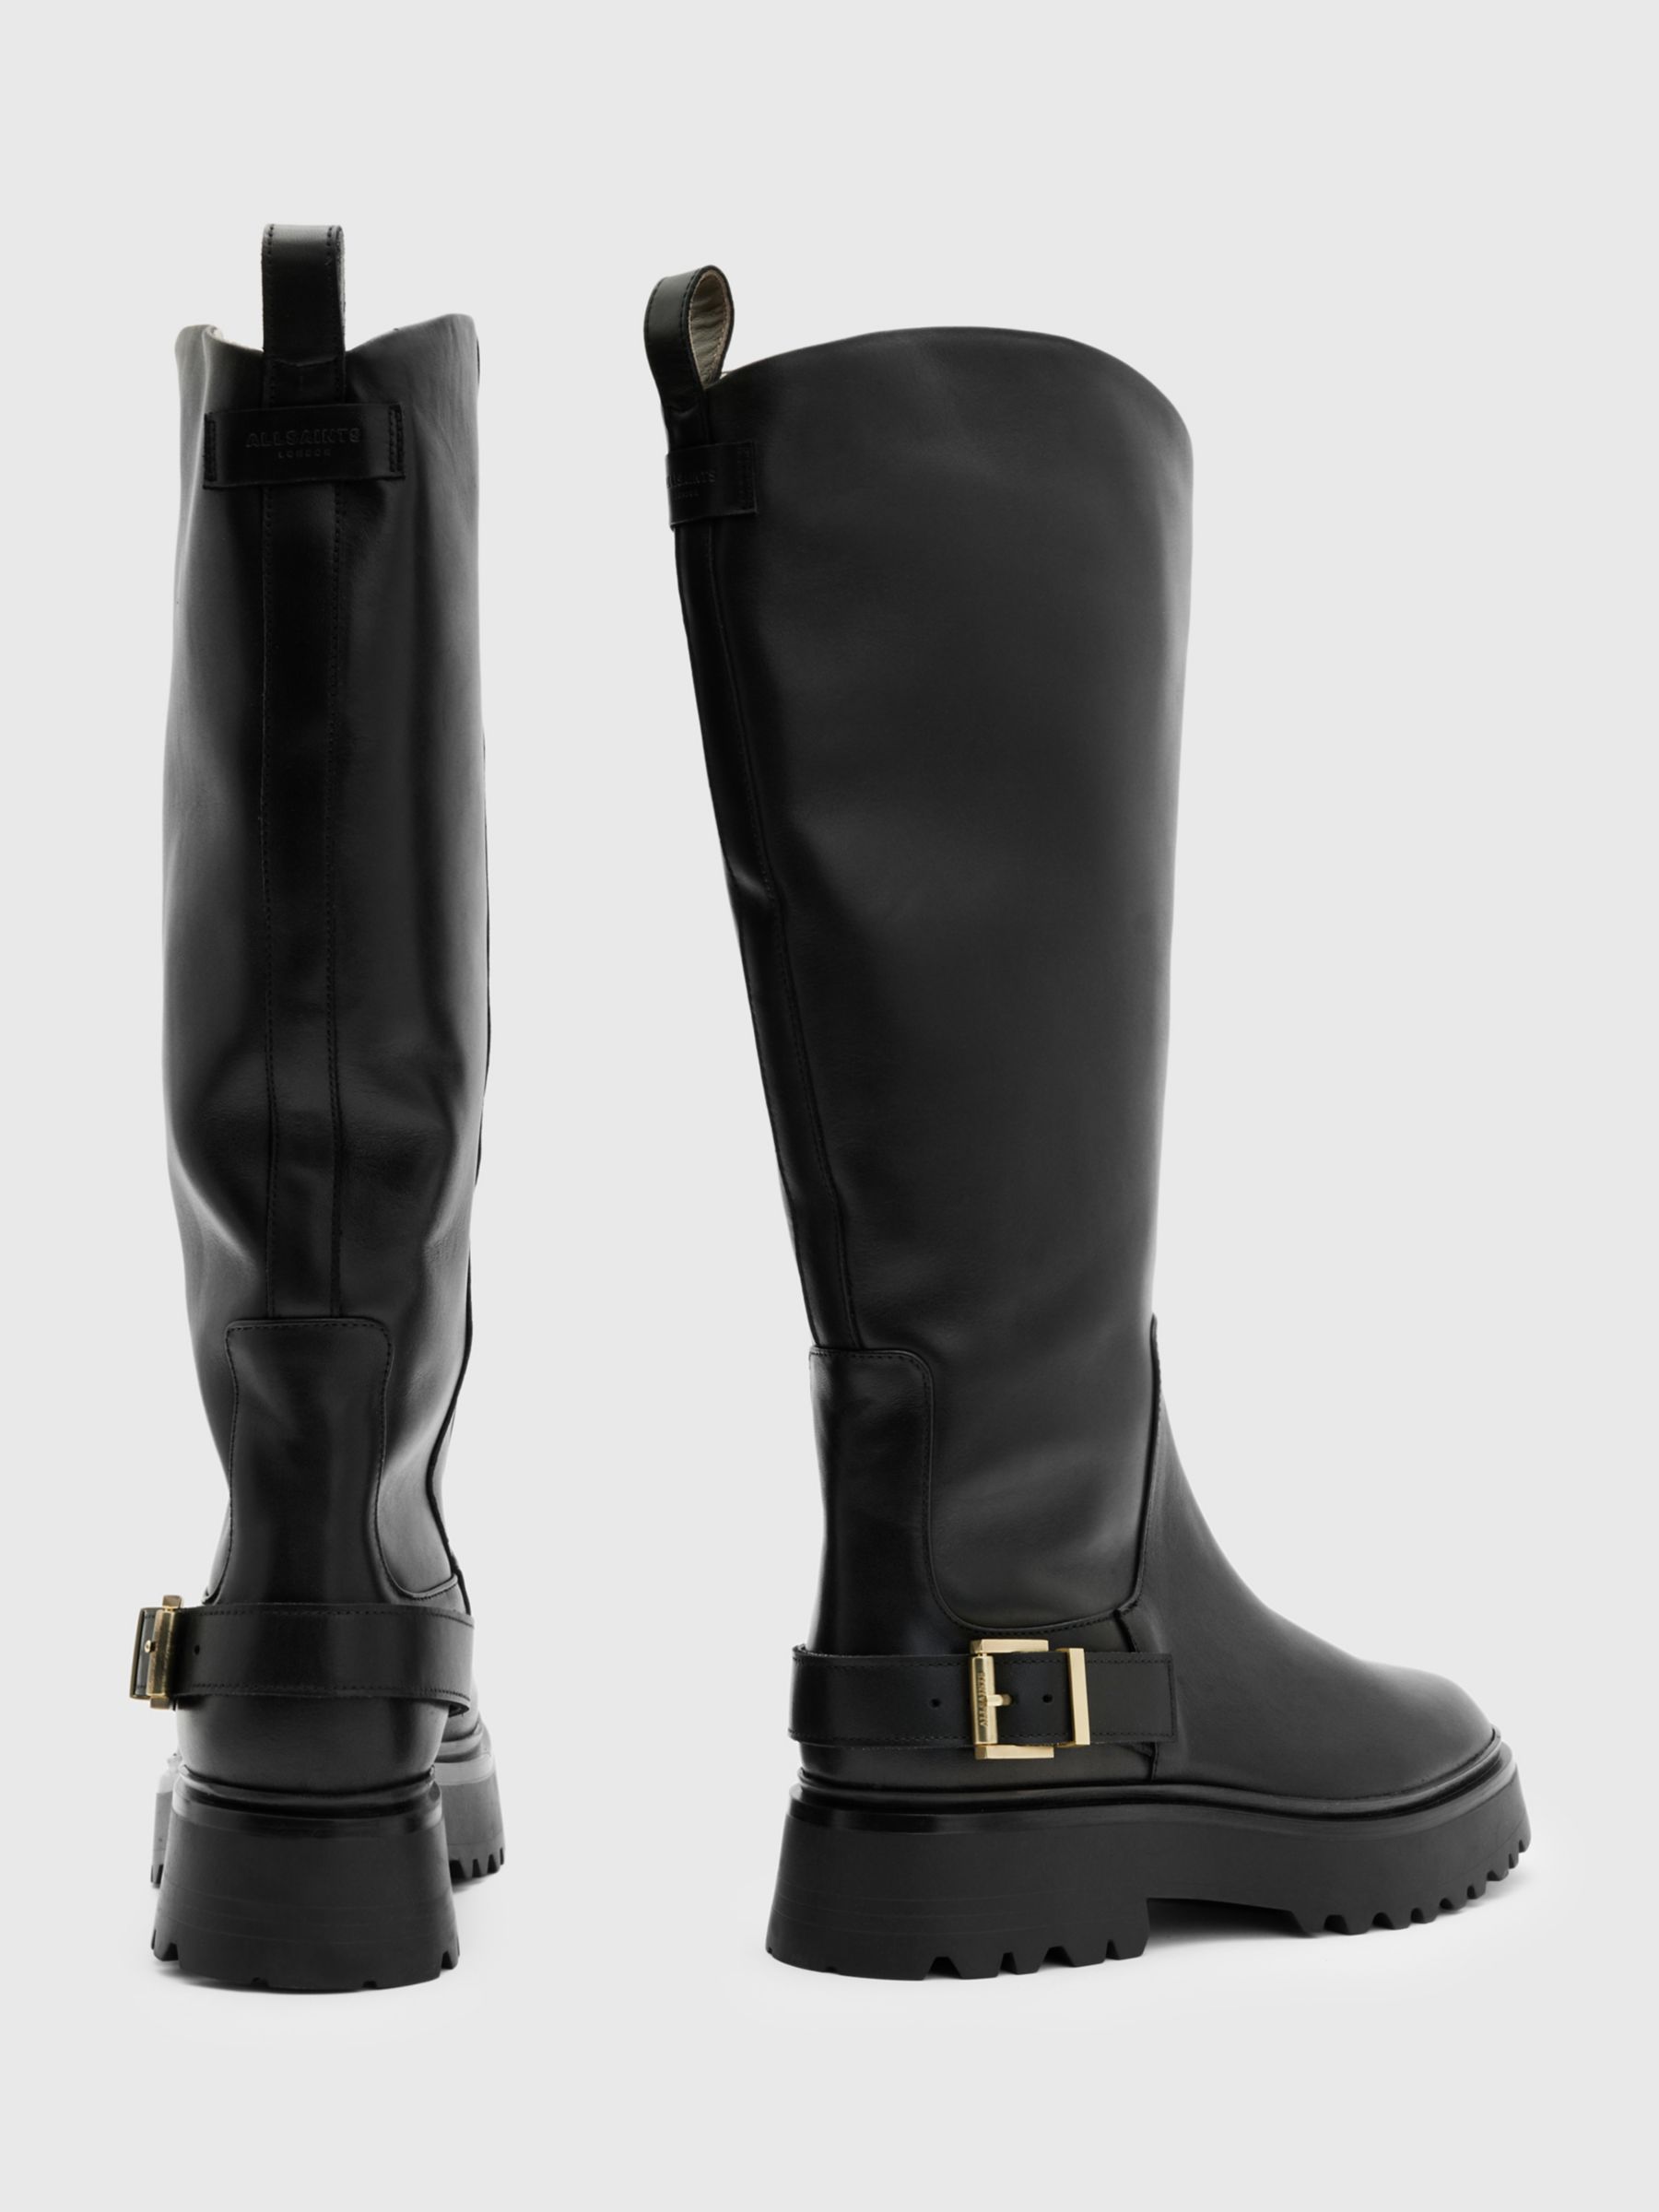 AllSaints Opal Pull-On Knee High Leather Boots, Black